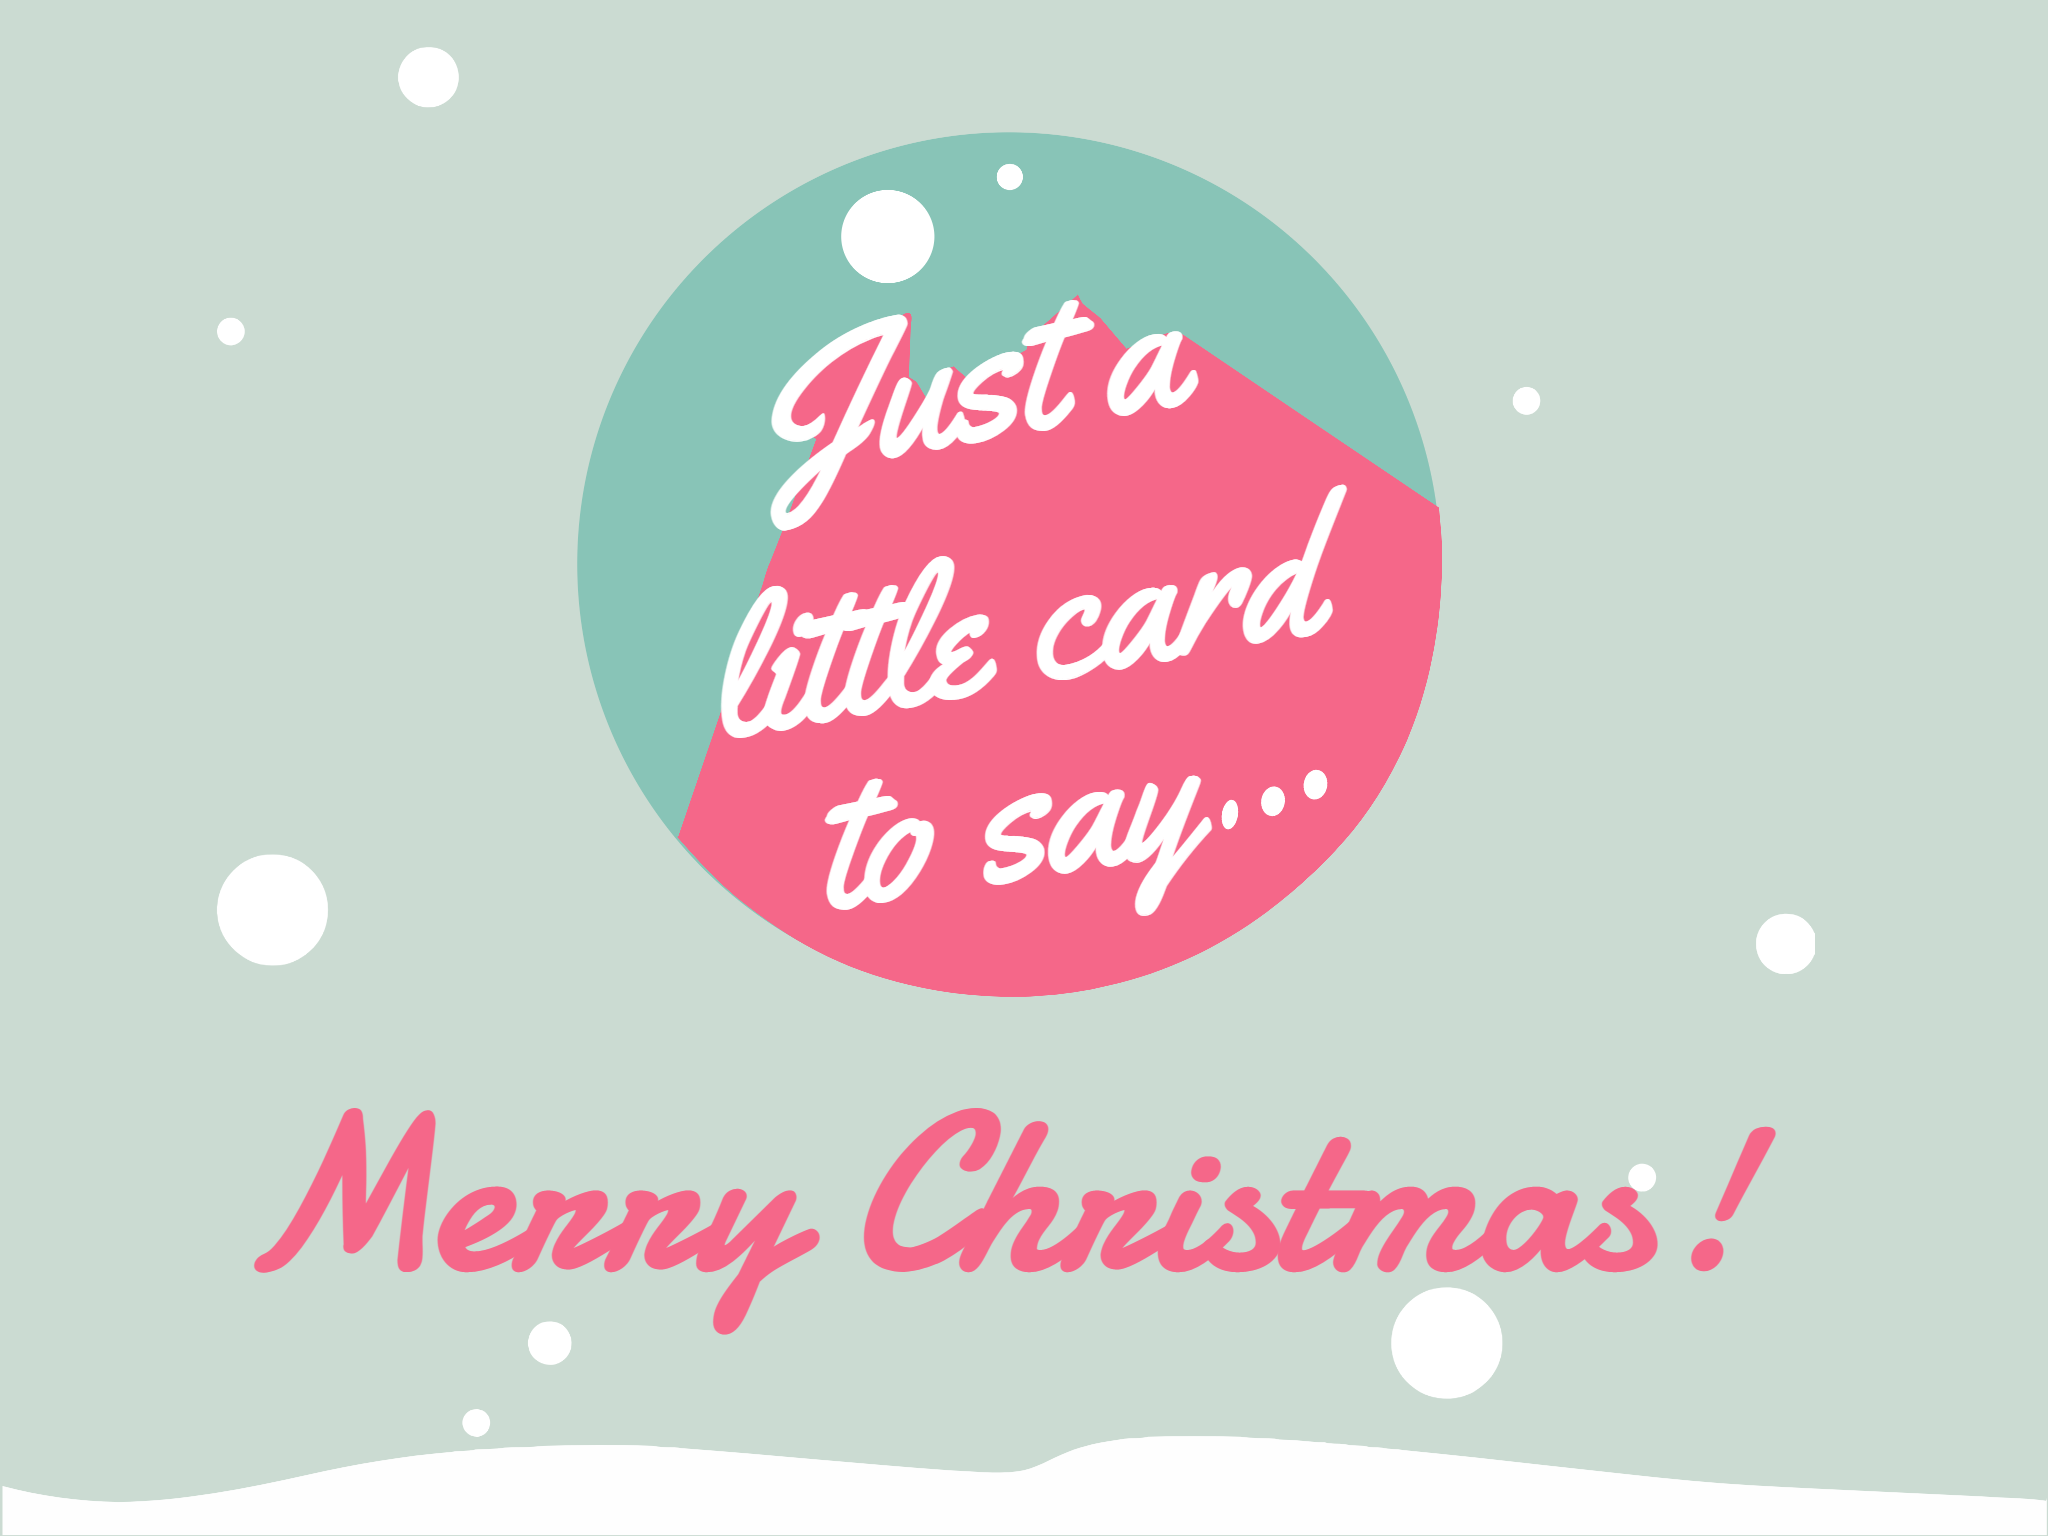 30+ Best Christmas Card Messages for Sending Wishes 2022 | Fotor